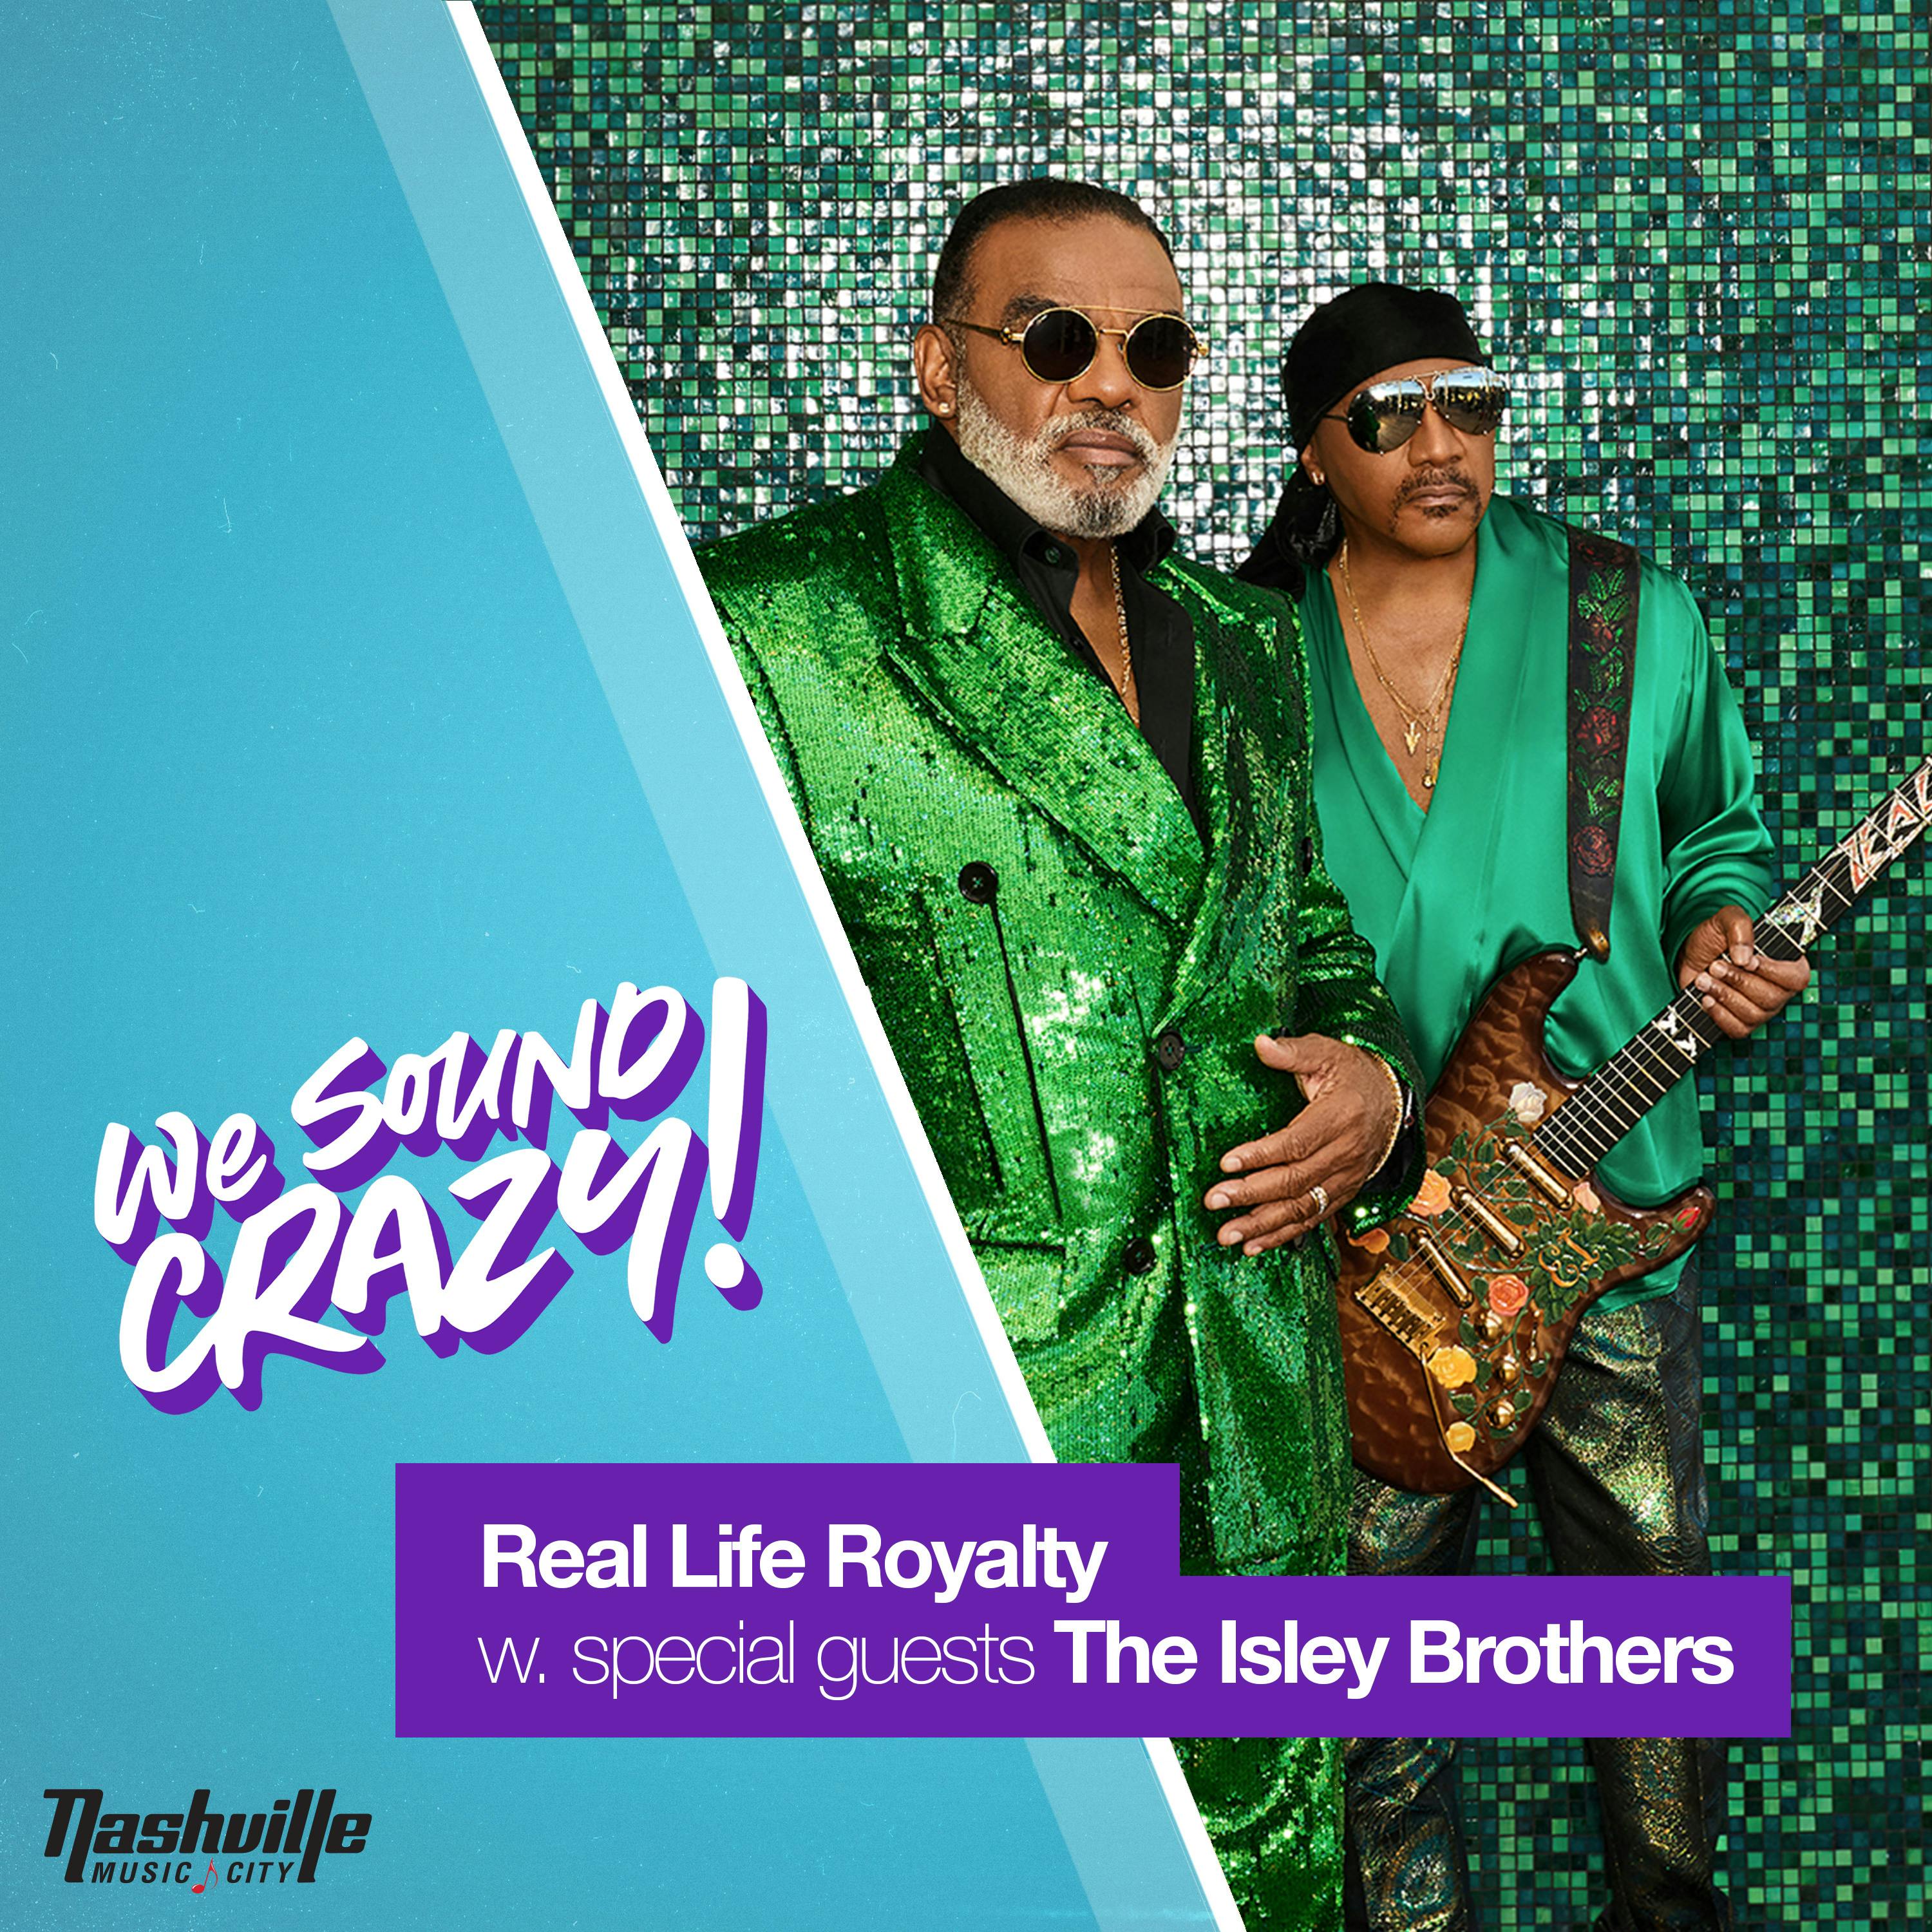 Real Life Royalty w. special guests The Isley Brothers